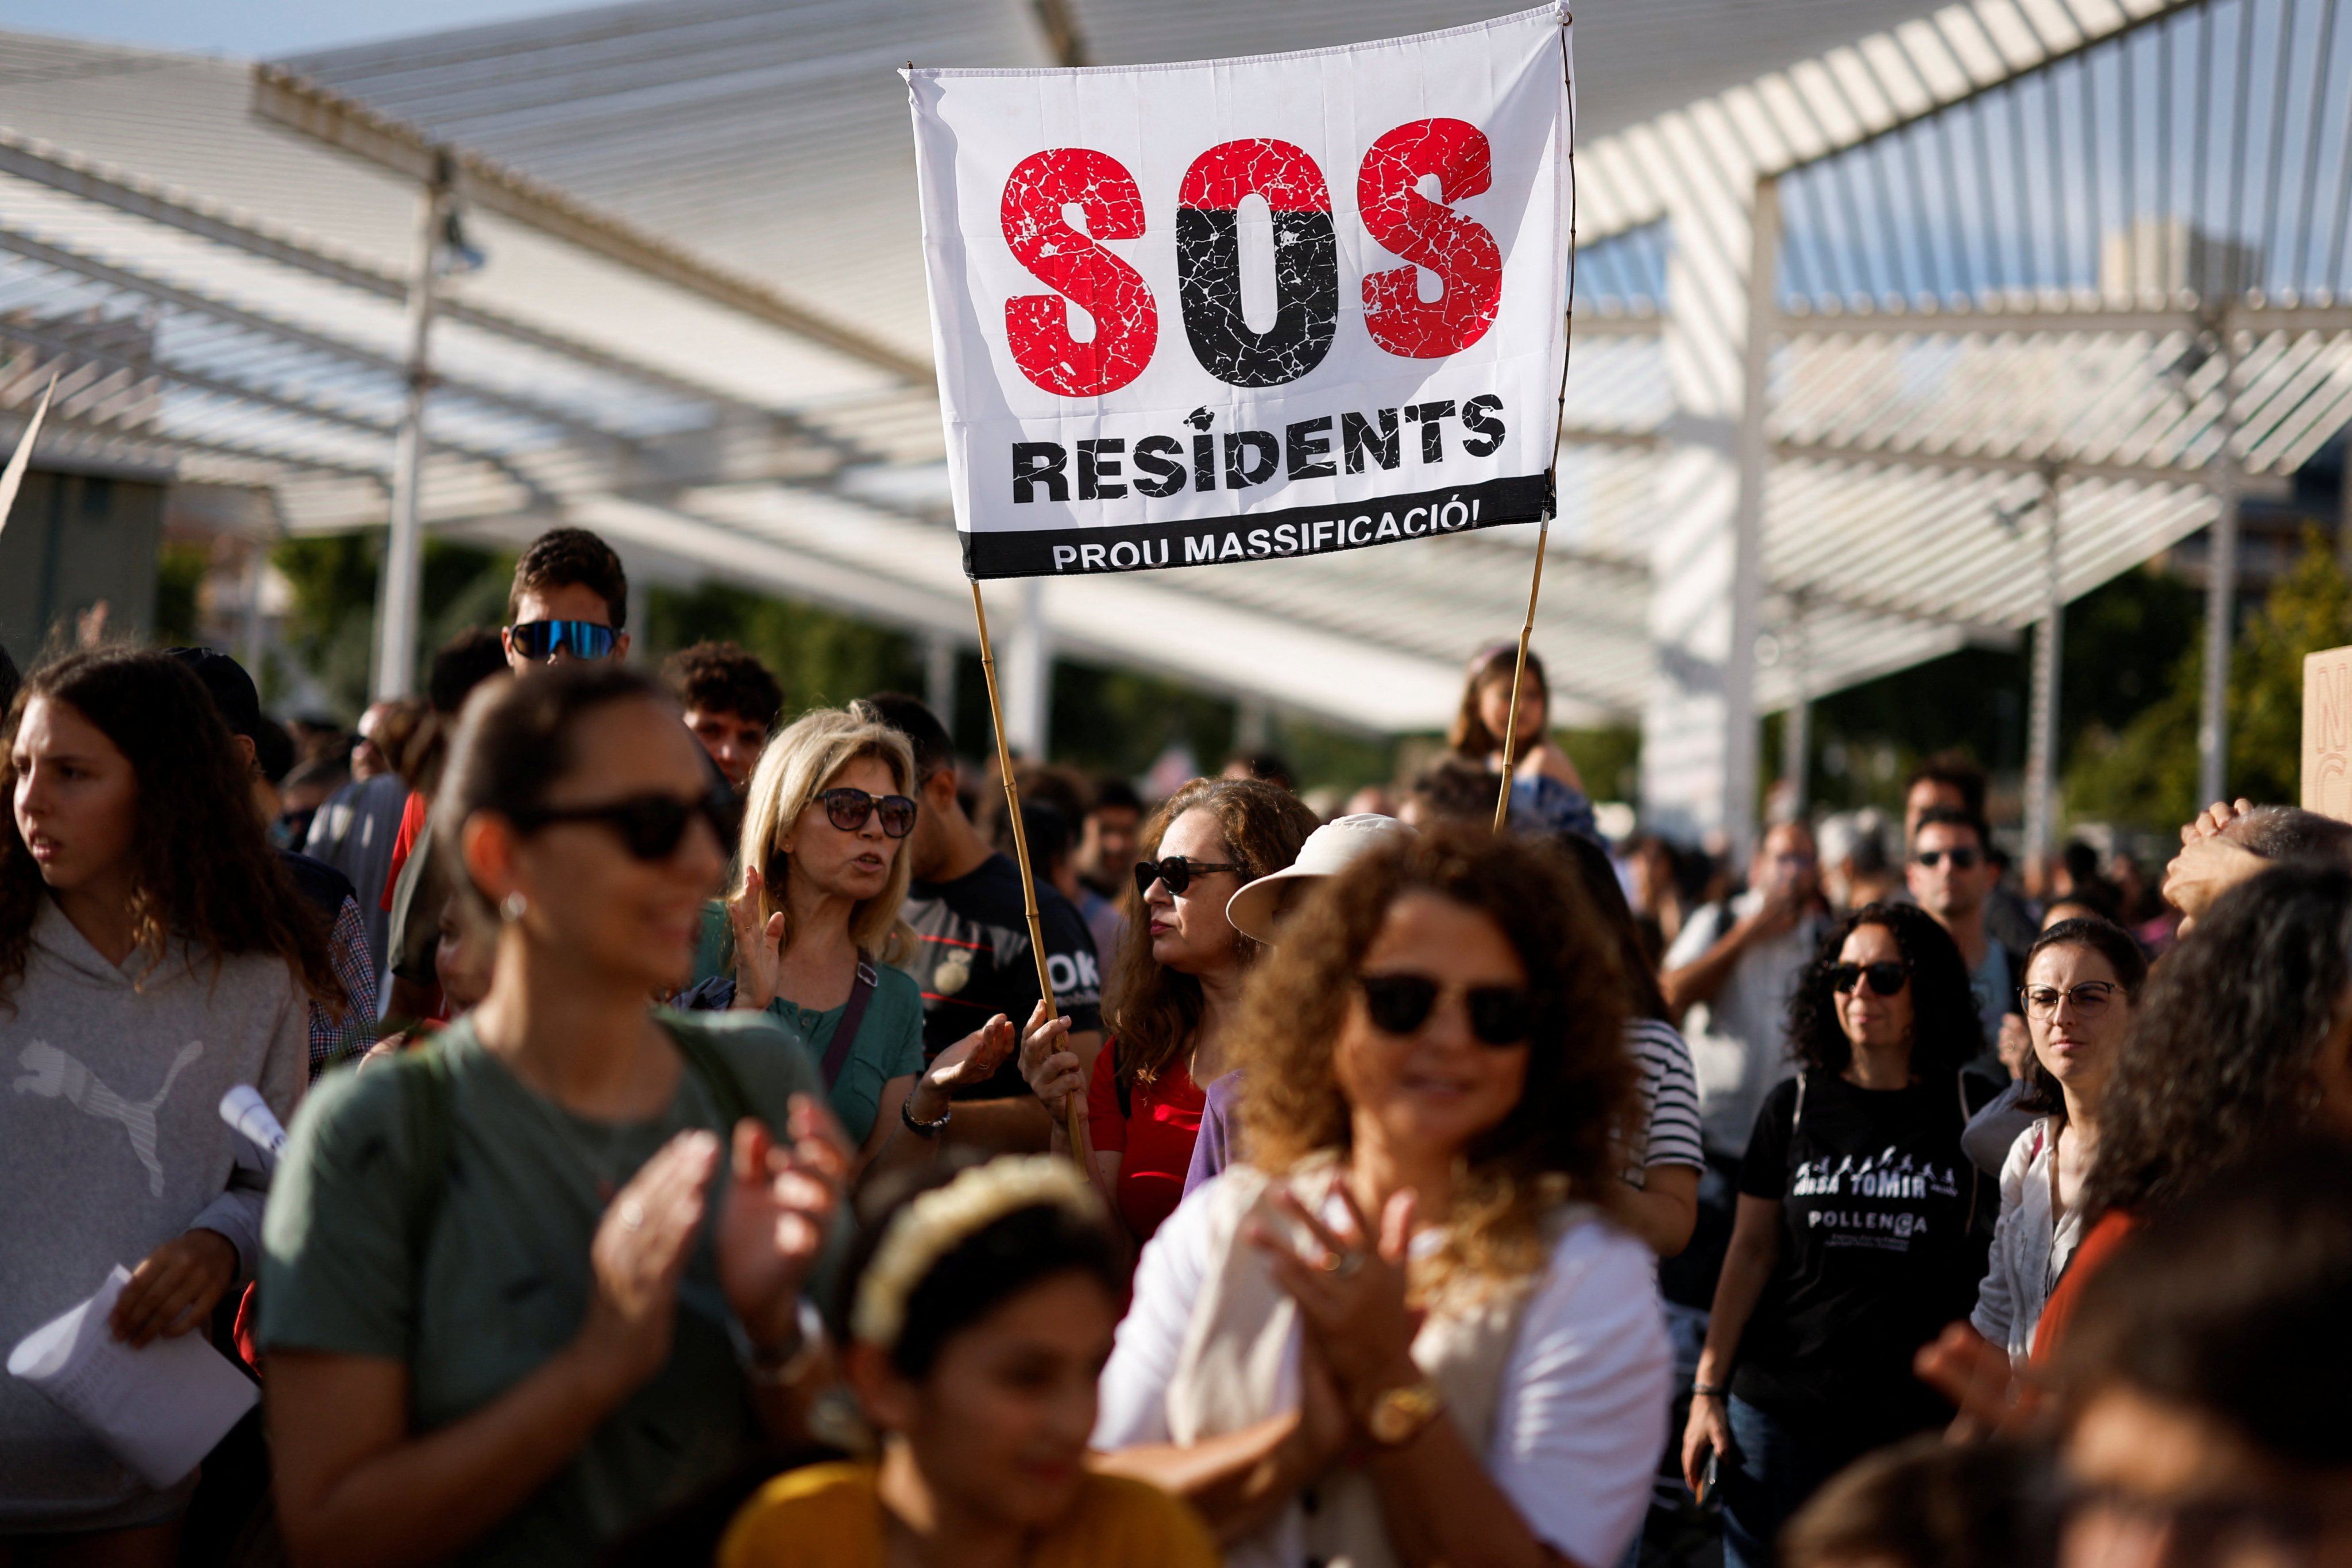 People in Palma de Mallorca, Spain, take part in a protest against mass tourism, which they say is responsible for increasing housing costs for locals. Photo: Reuters